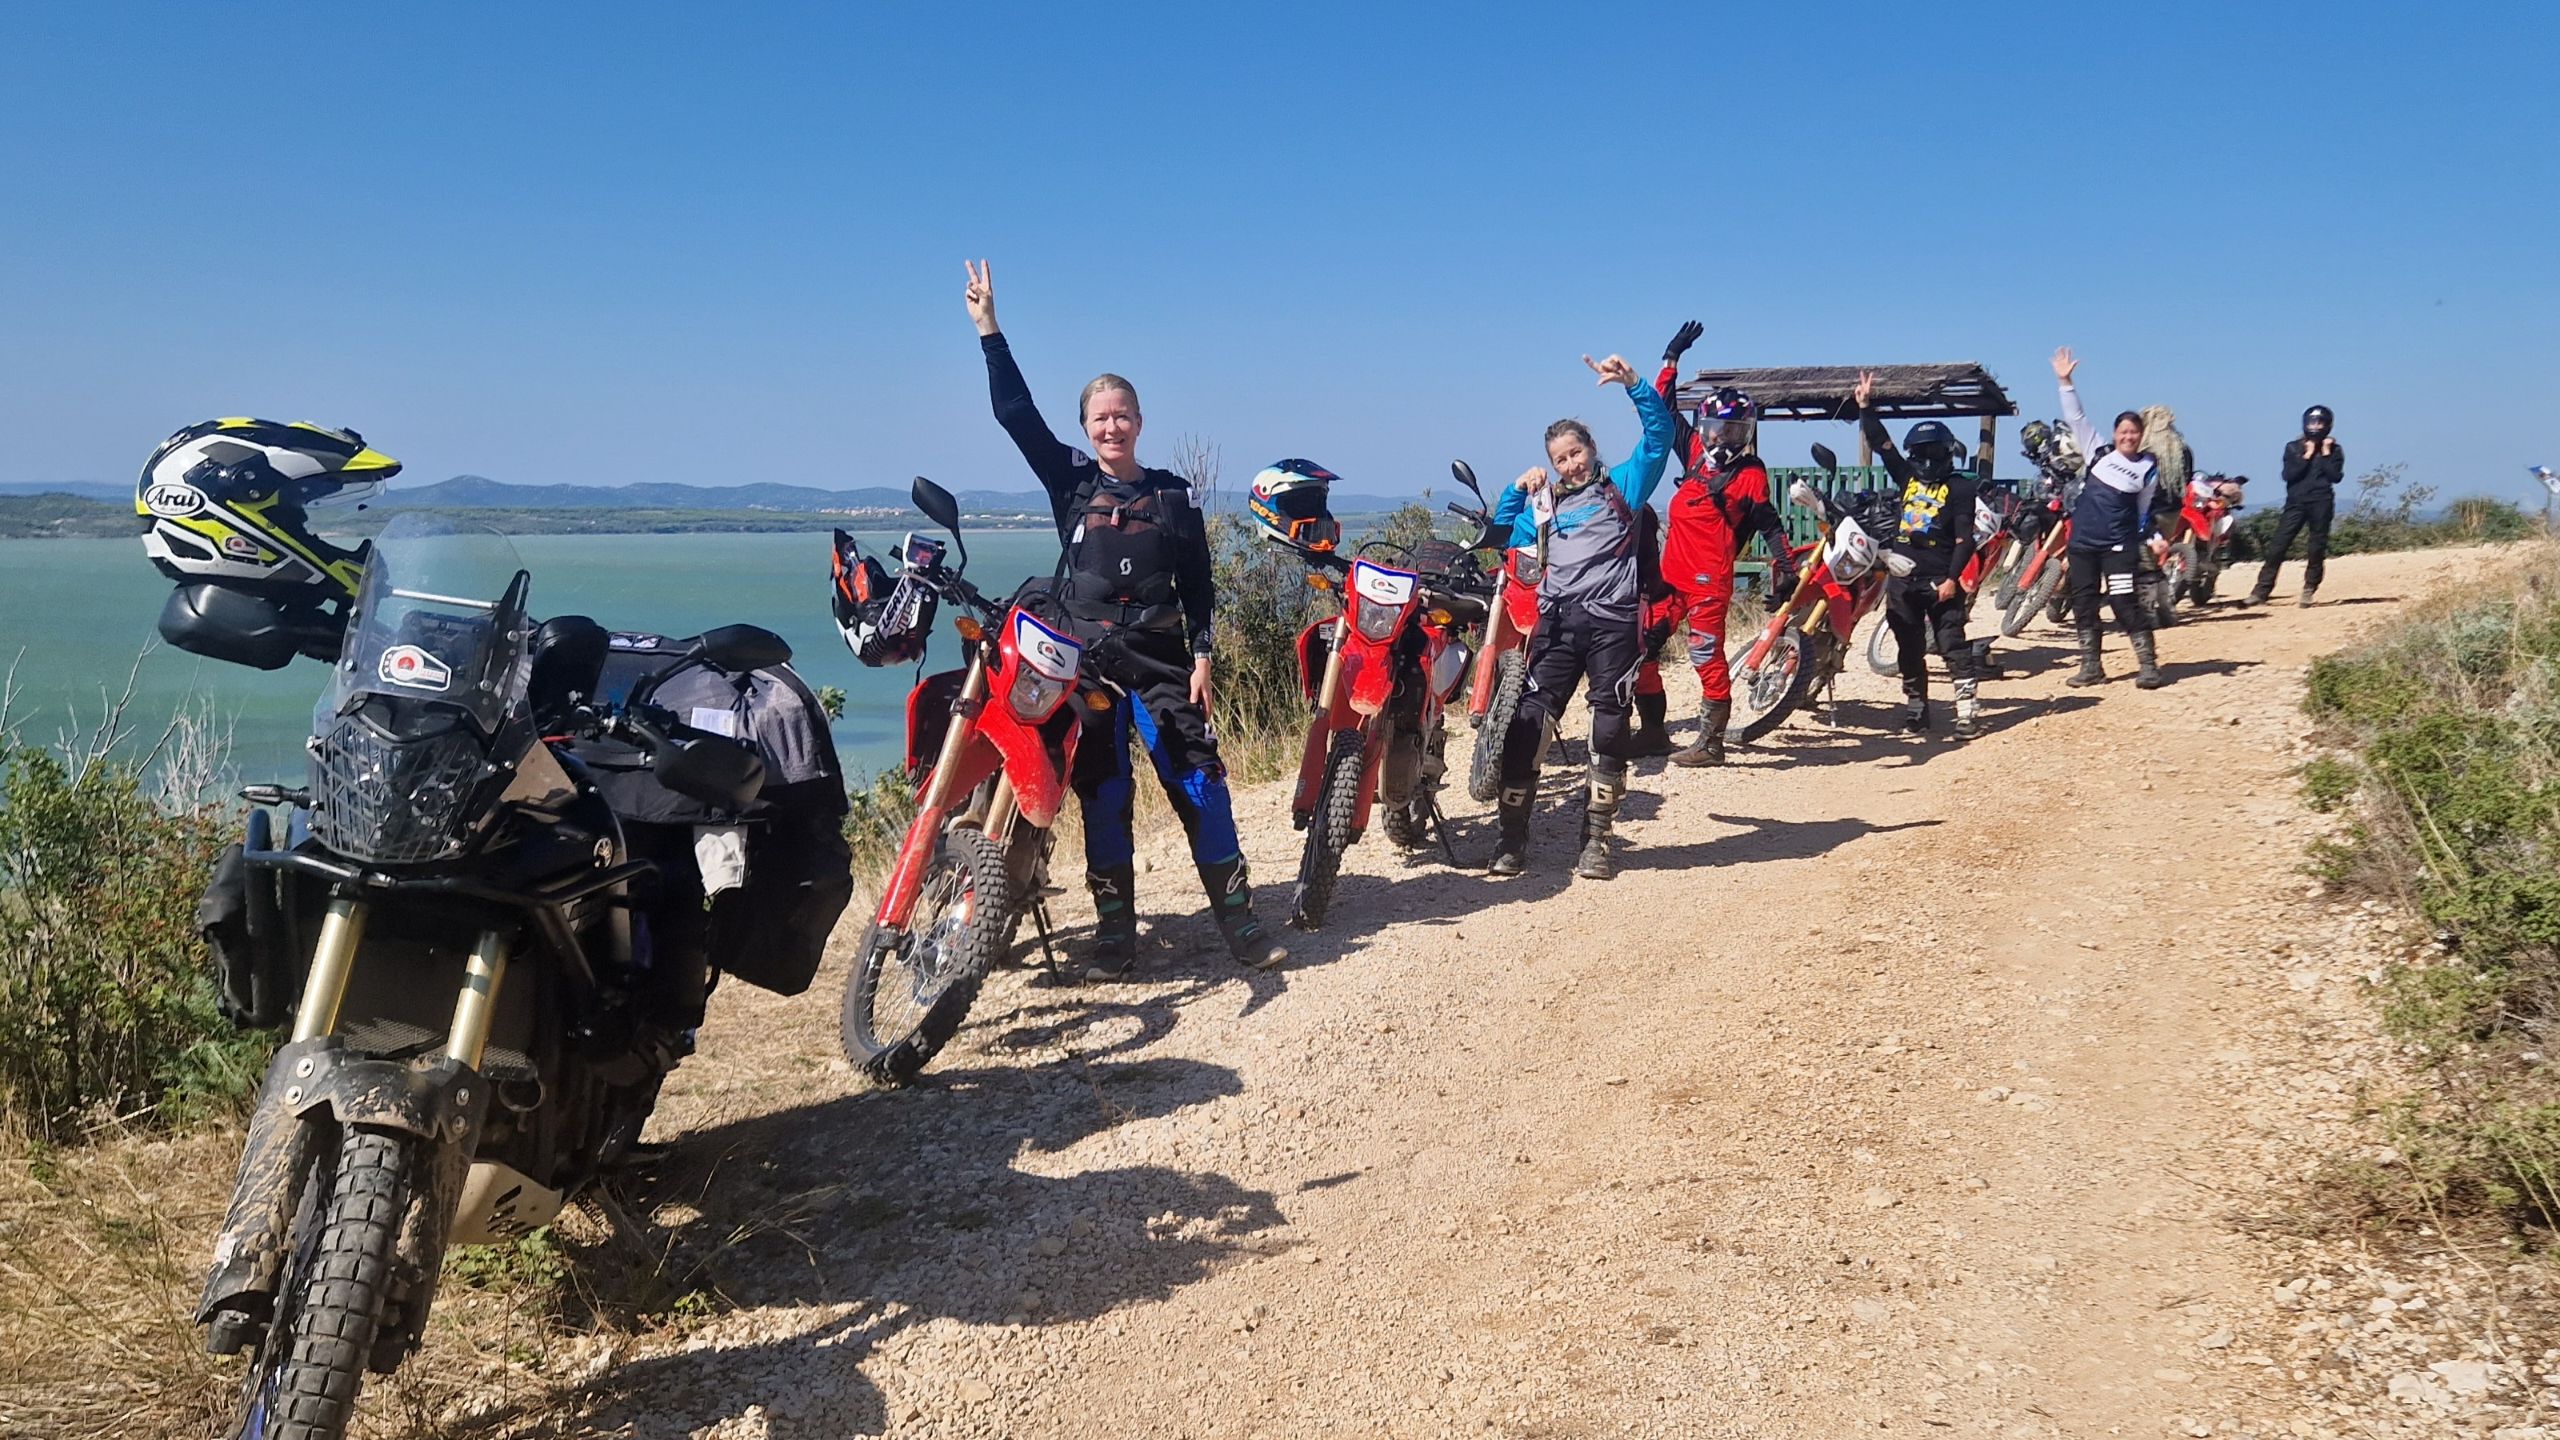 Funmoto ADVentures sightseeing 4 day only womens motorcycle tour in Croatia greetings